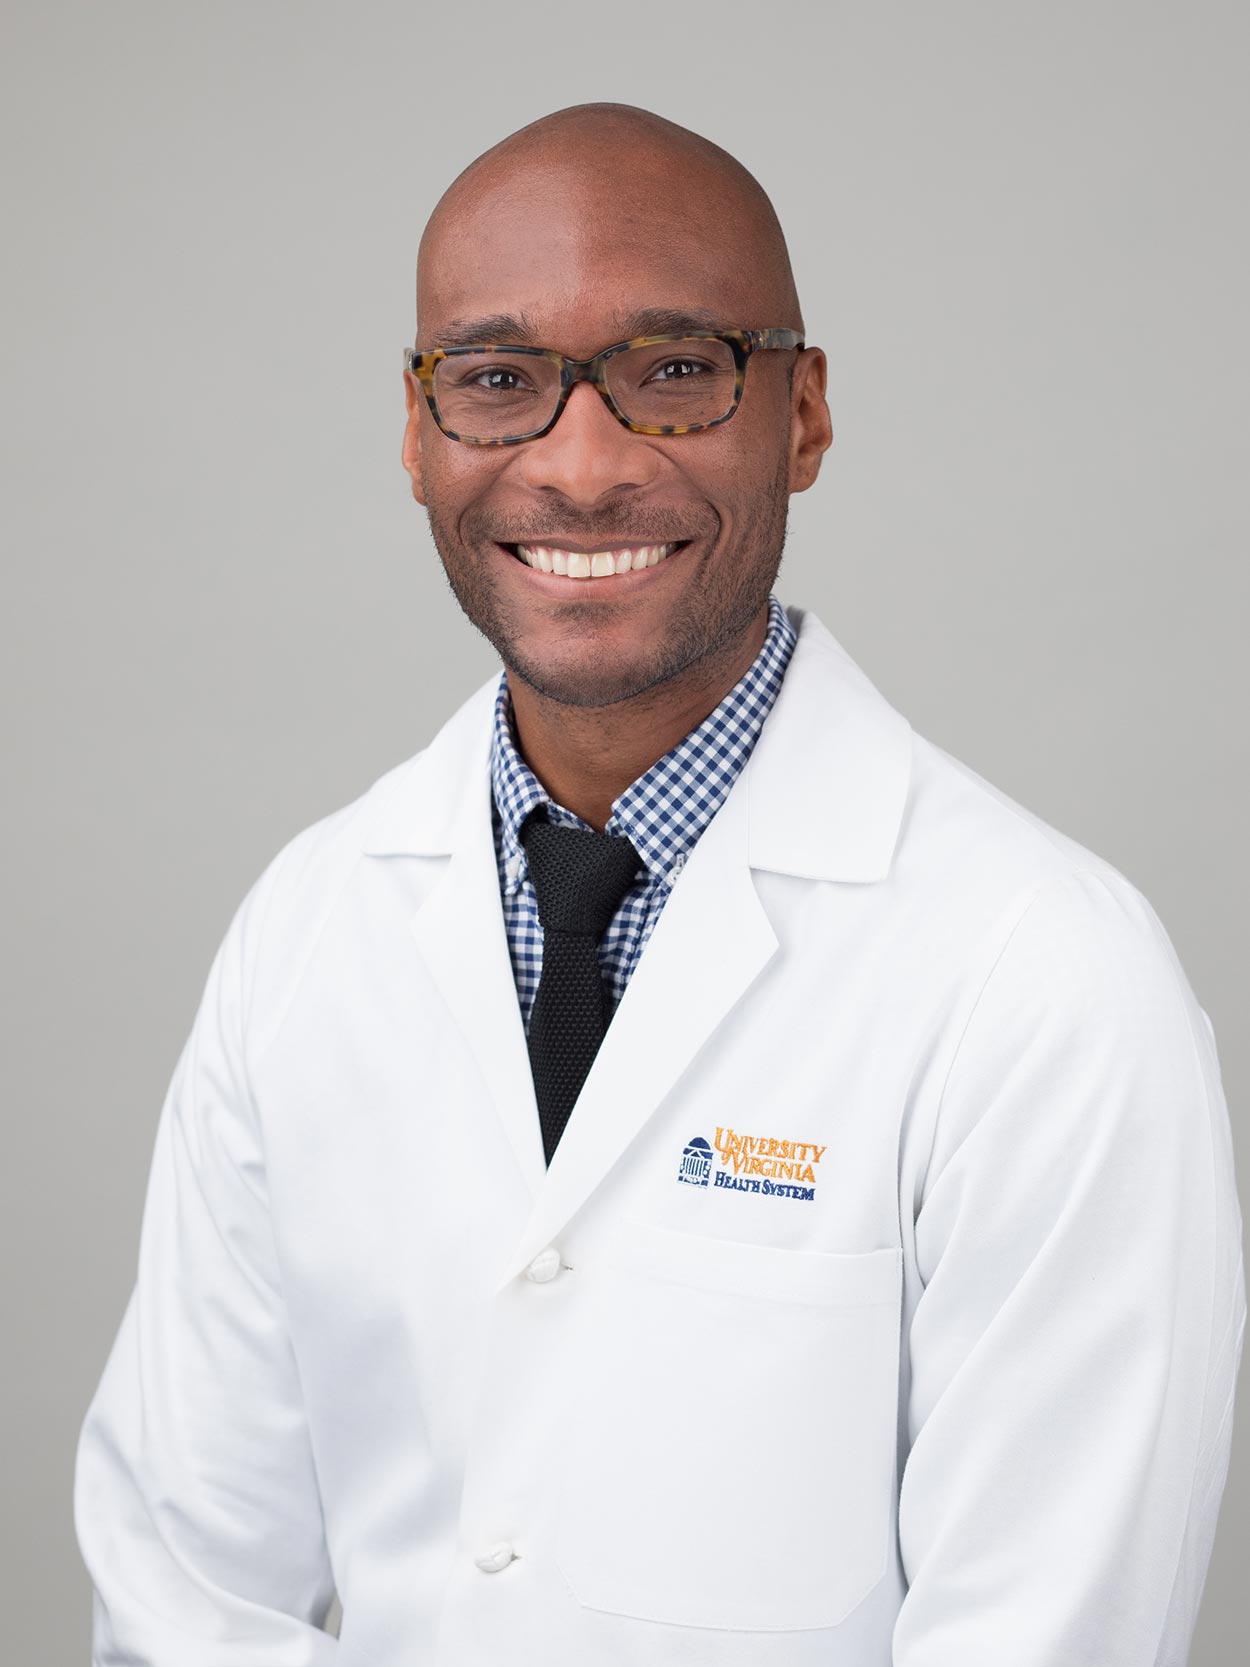 UVA Health's Dr. Taison Bell in a white coat and tie